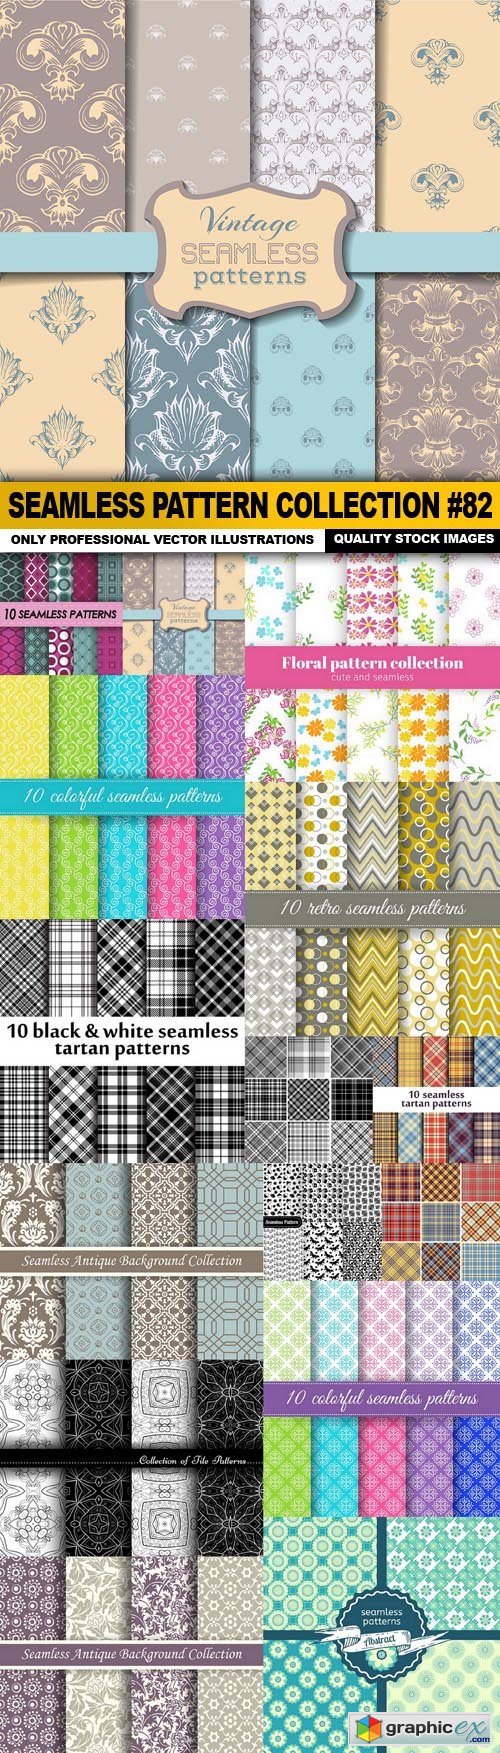 Seamless Pattern Collection #82 - 15 Vector